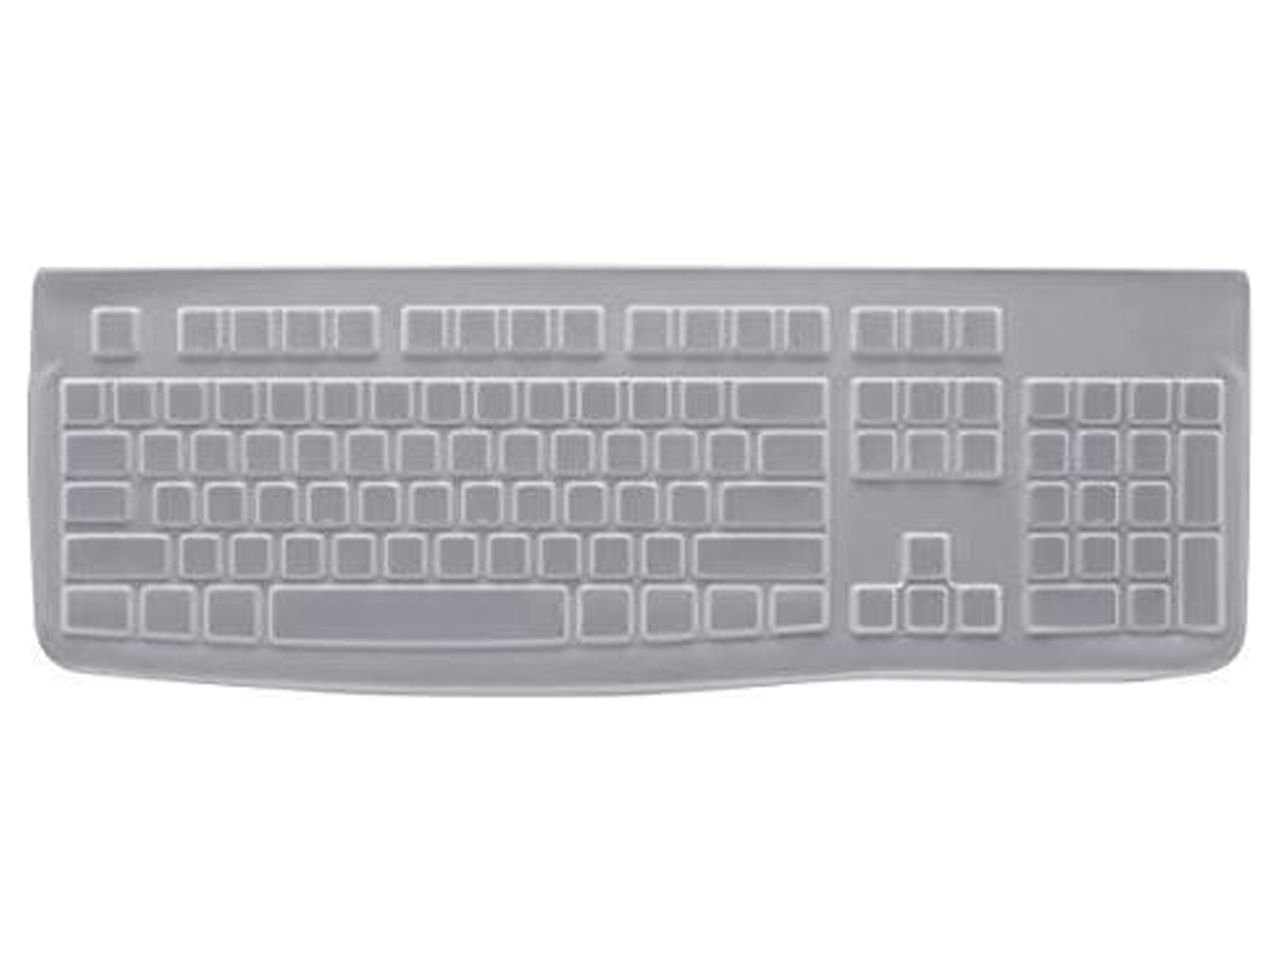 Logitech Protective Covers for K120 Keyboard - Silicone - image 3 of 5